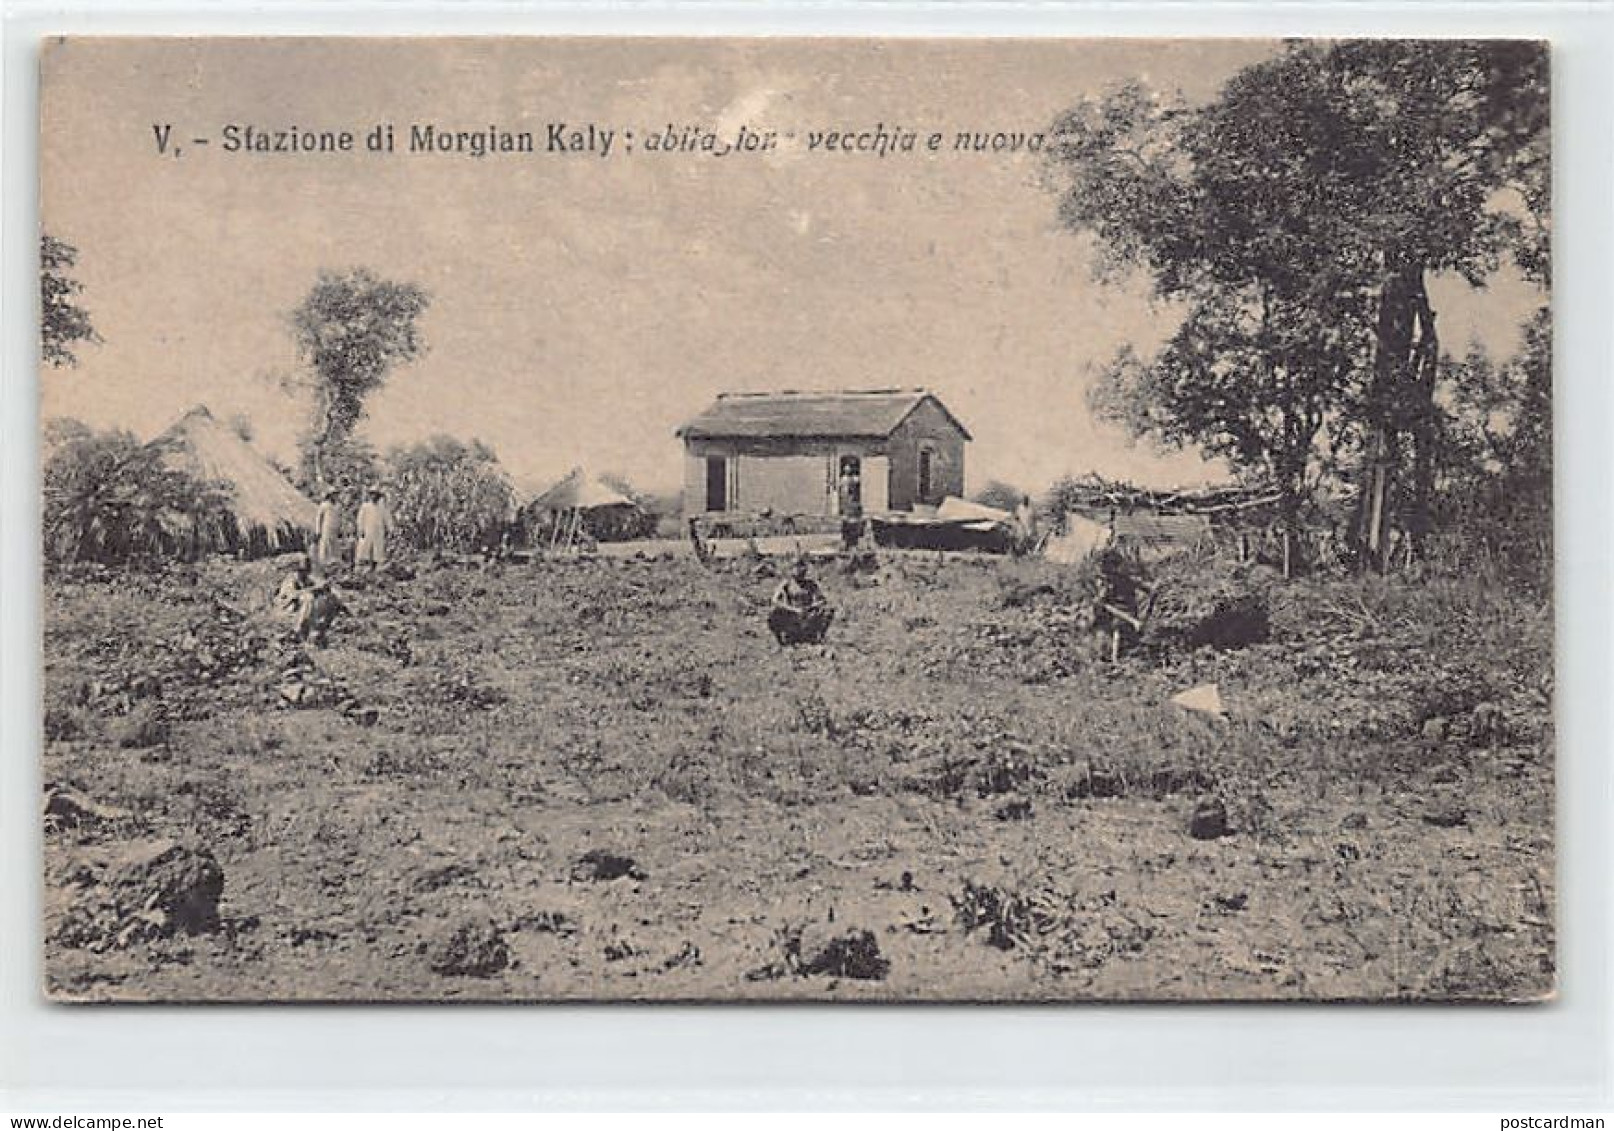 Eritrea - MORGIAN KALY - The Missionary Station - Publ. African Missions Of Verona, Italy 209 - Erythrée